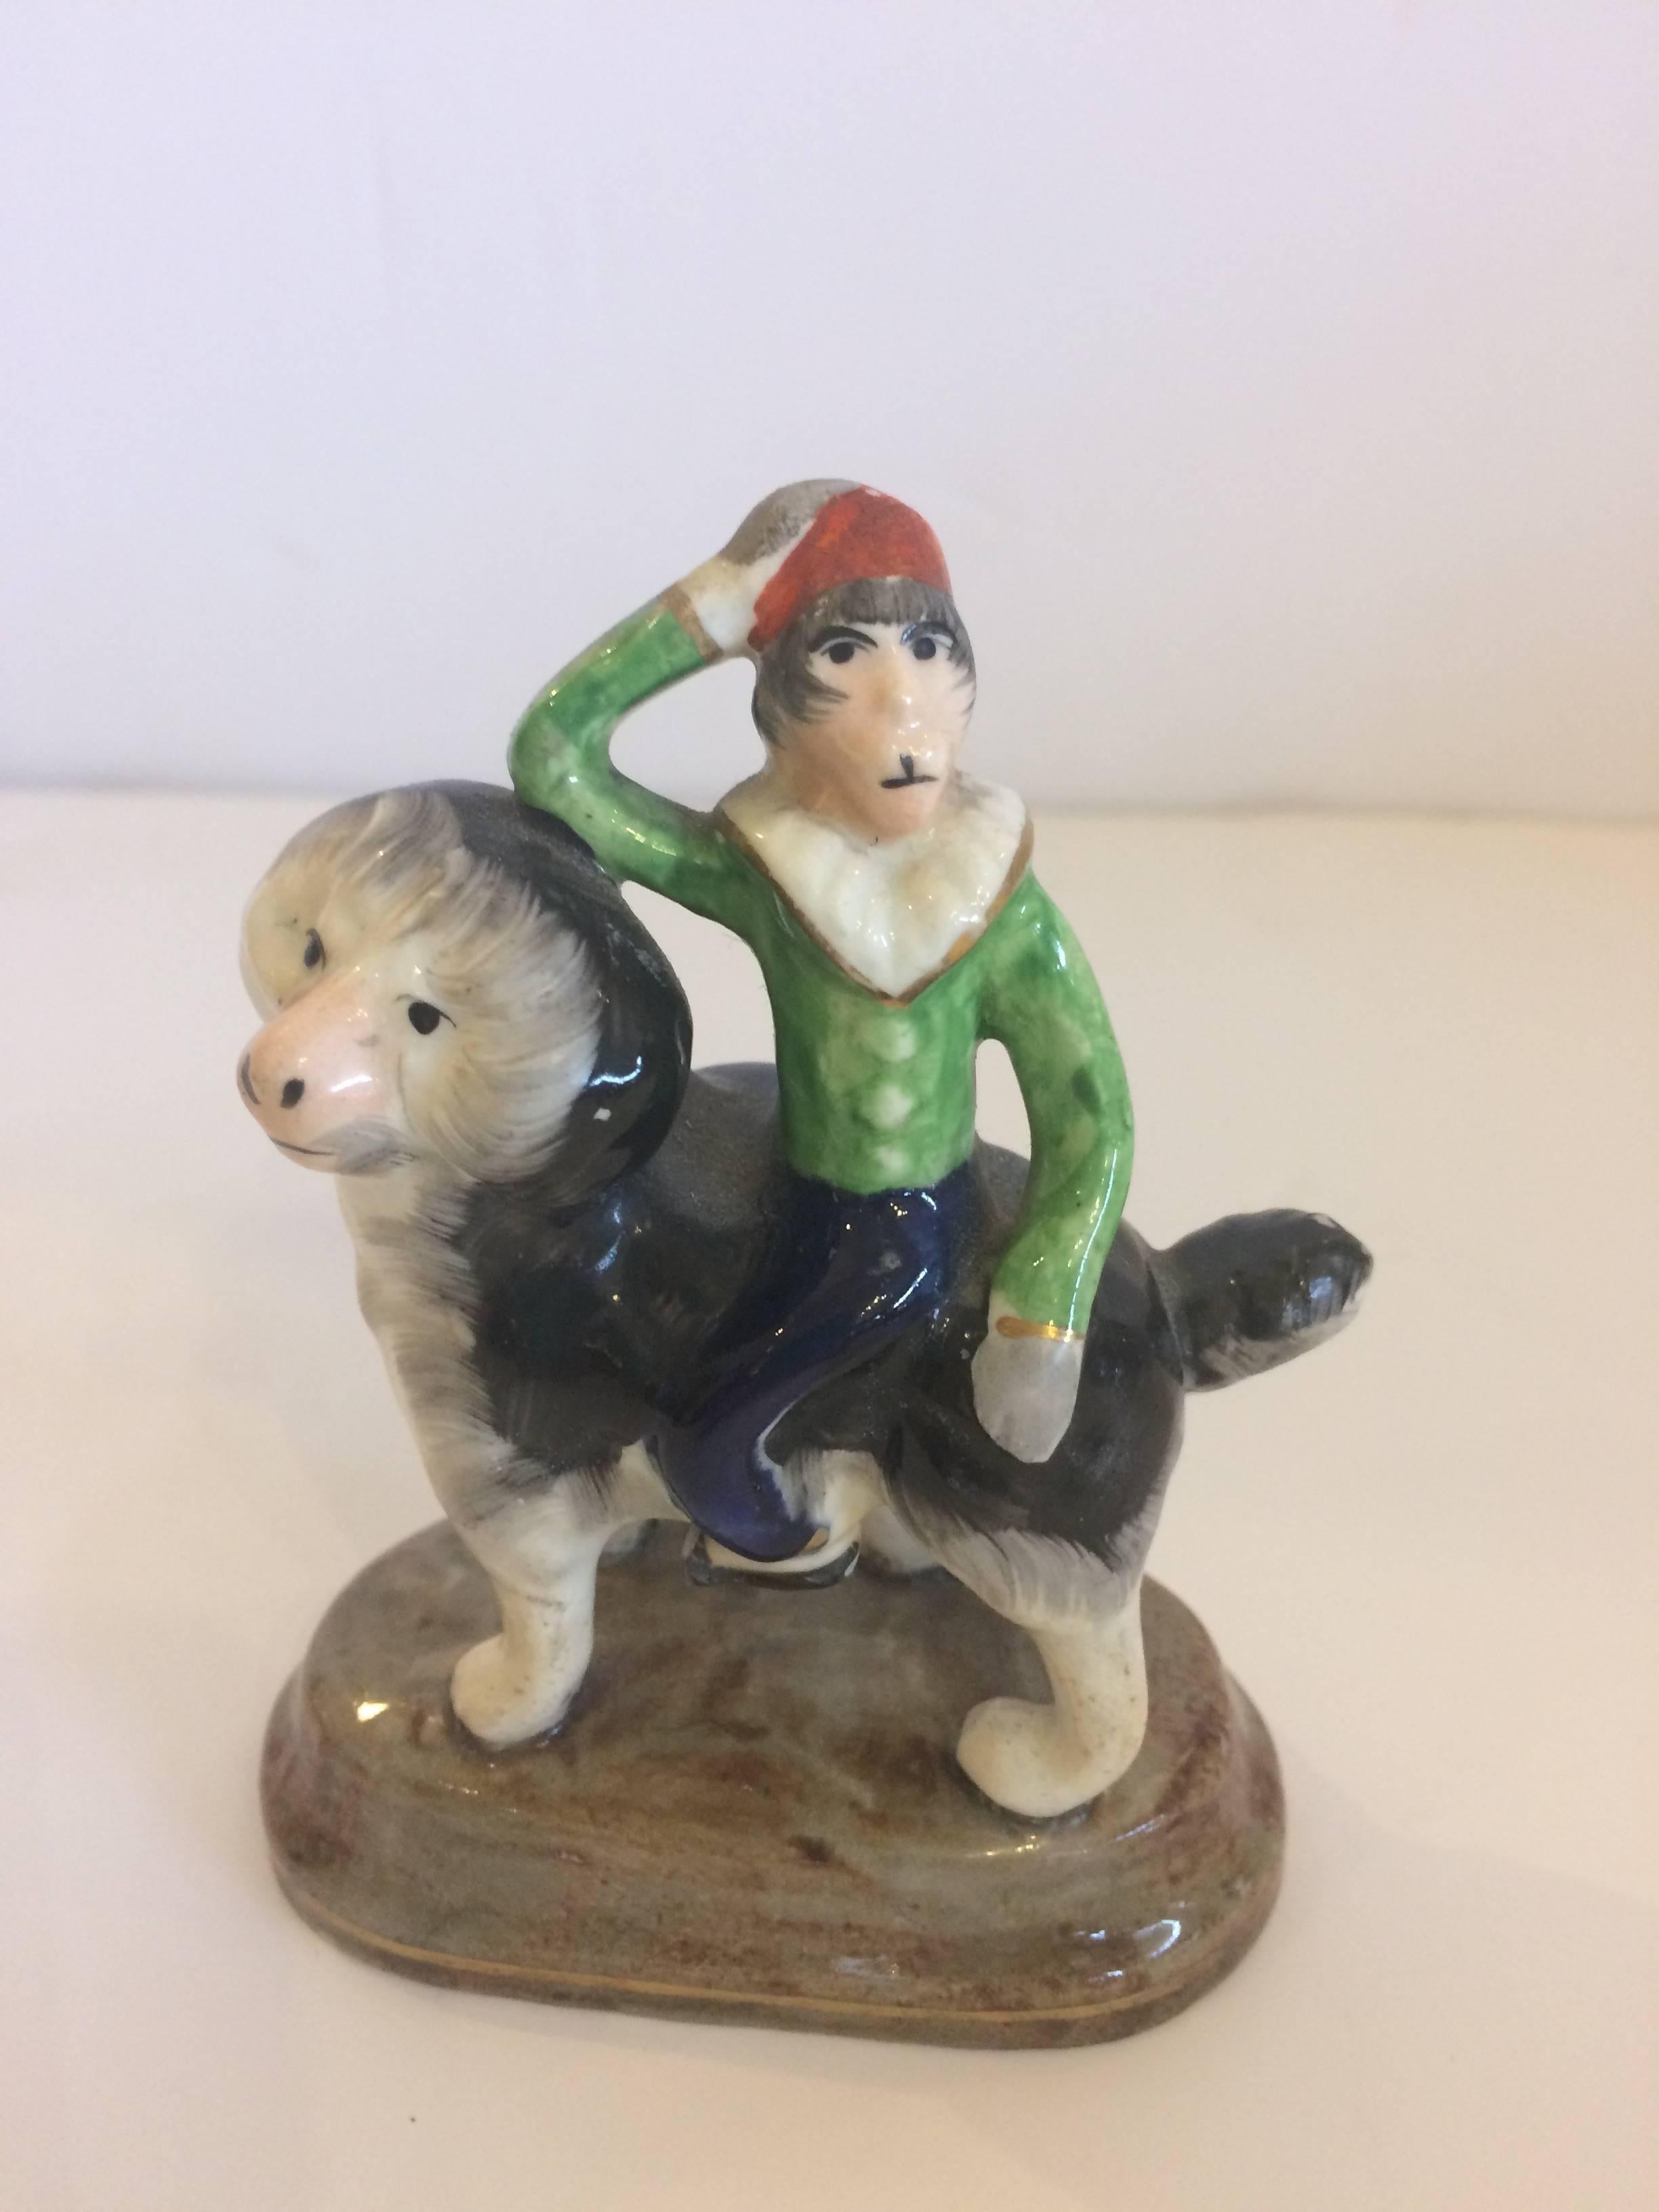 Diminutive Staffordshire having a darling monkey riding on the back of a fluffy dog.